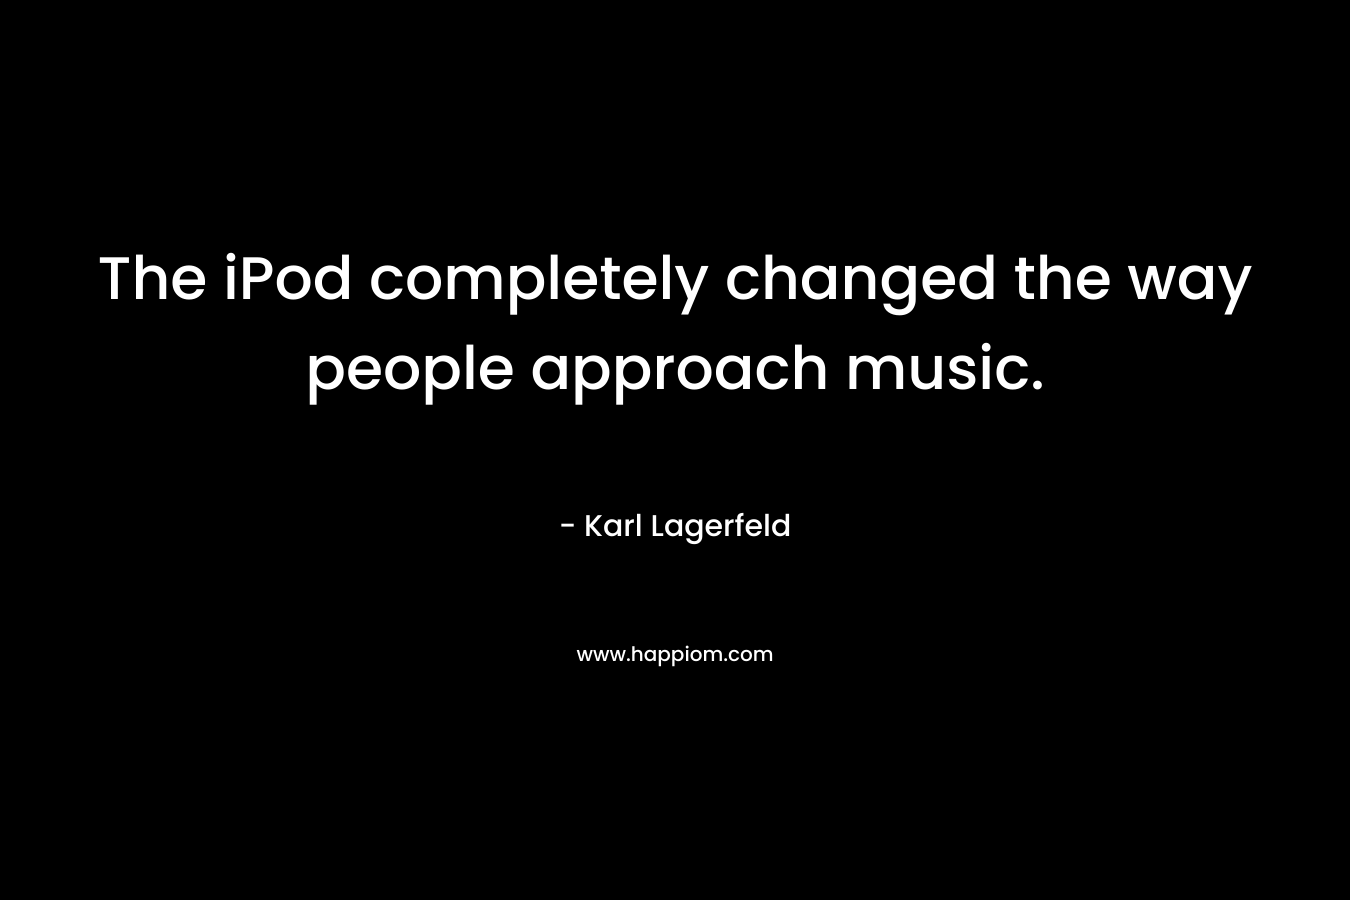 The iPod completely changed the way people approach music. – Karl Lagerfeld